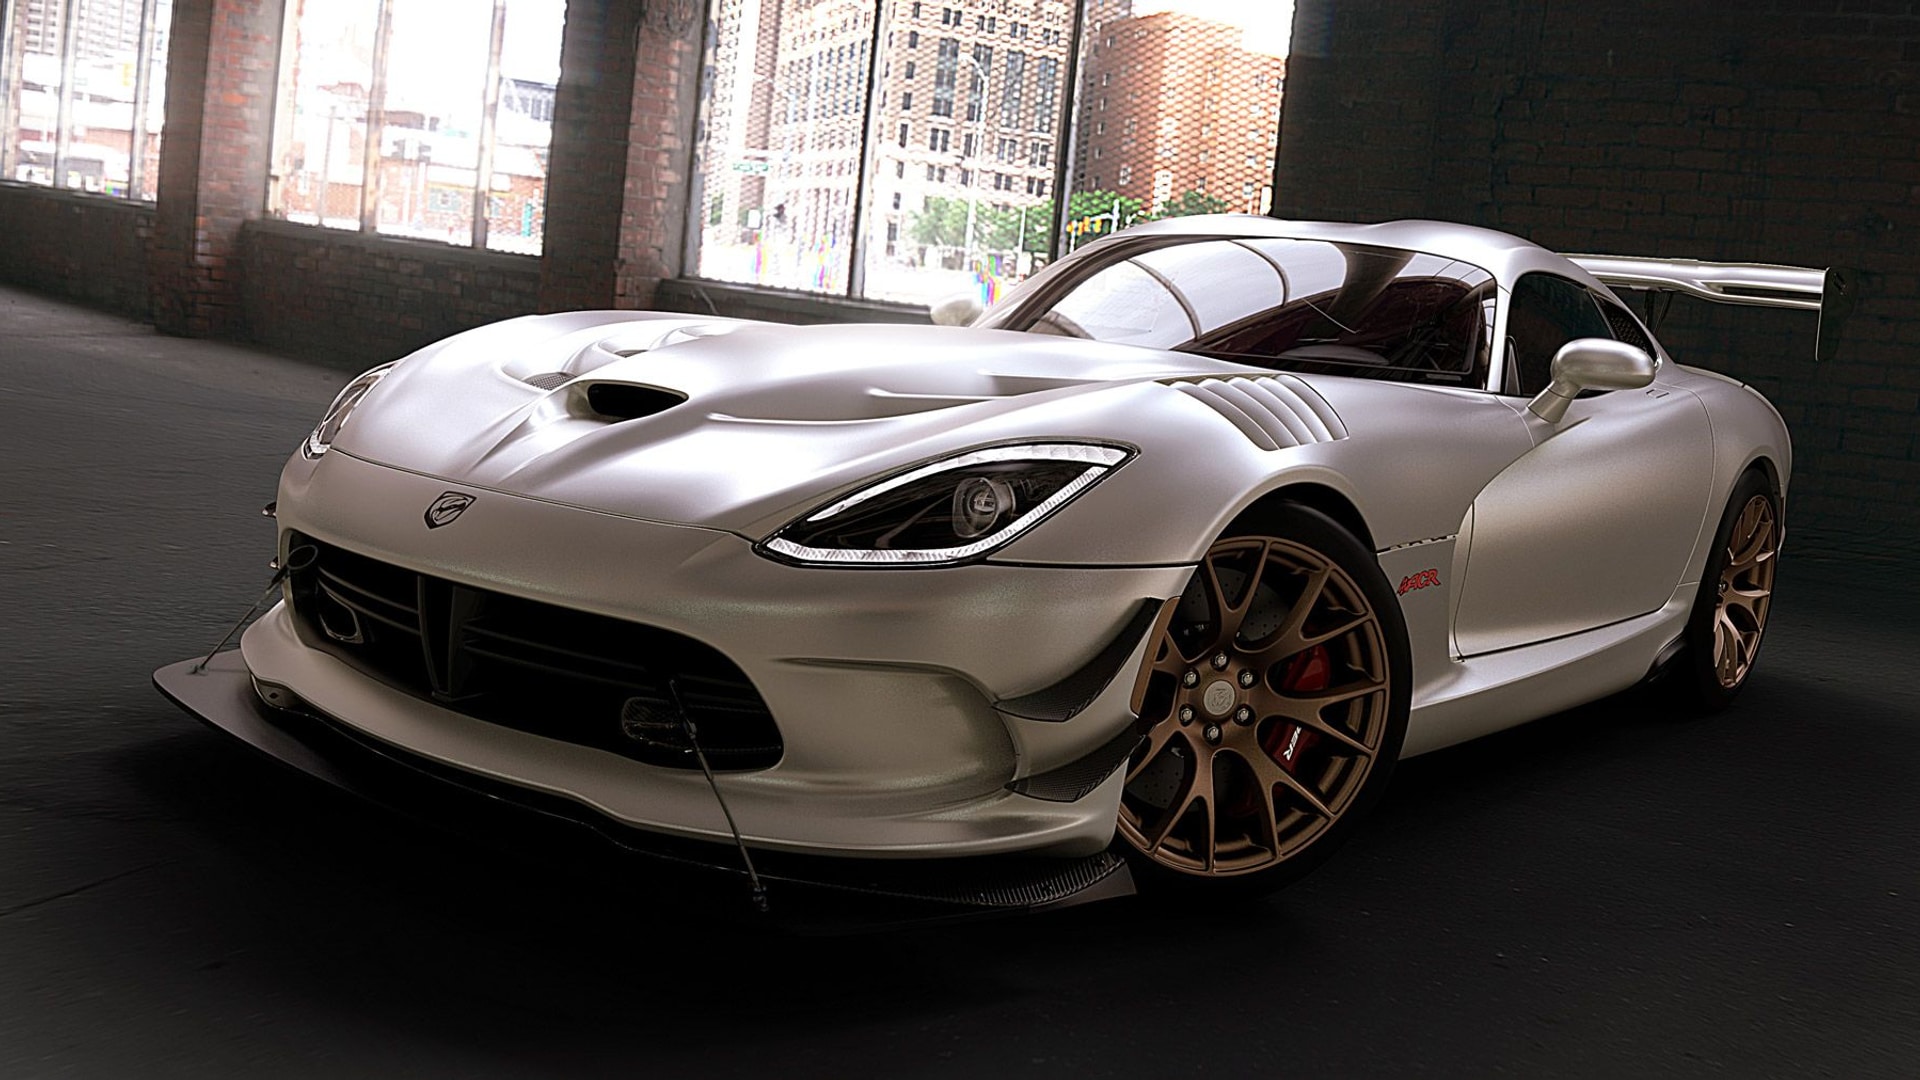 2016 Dodge Viper ACR with new matte exterior finish